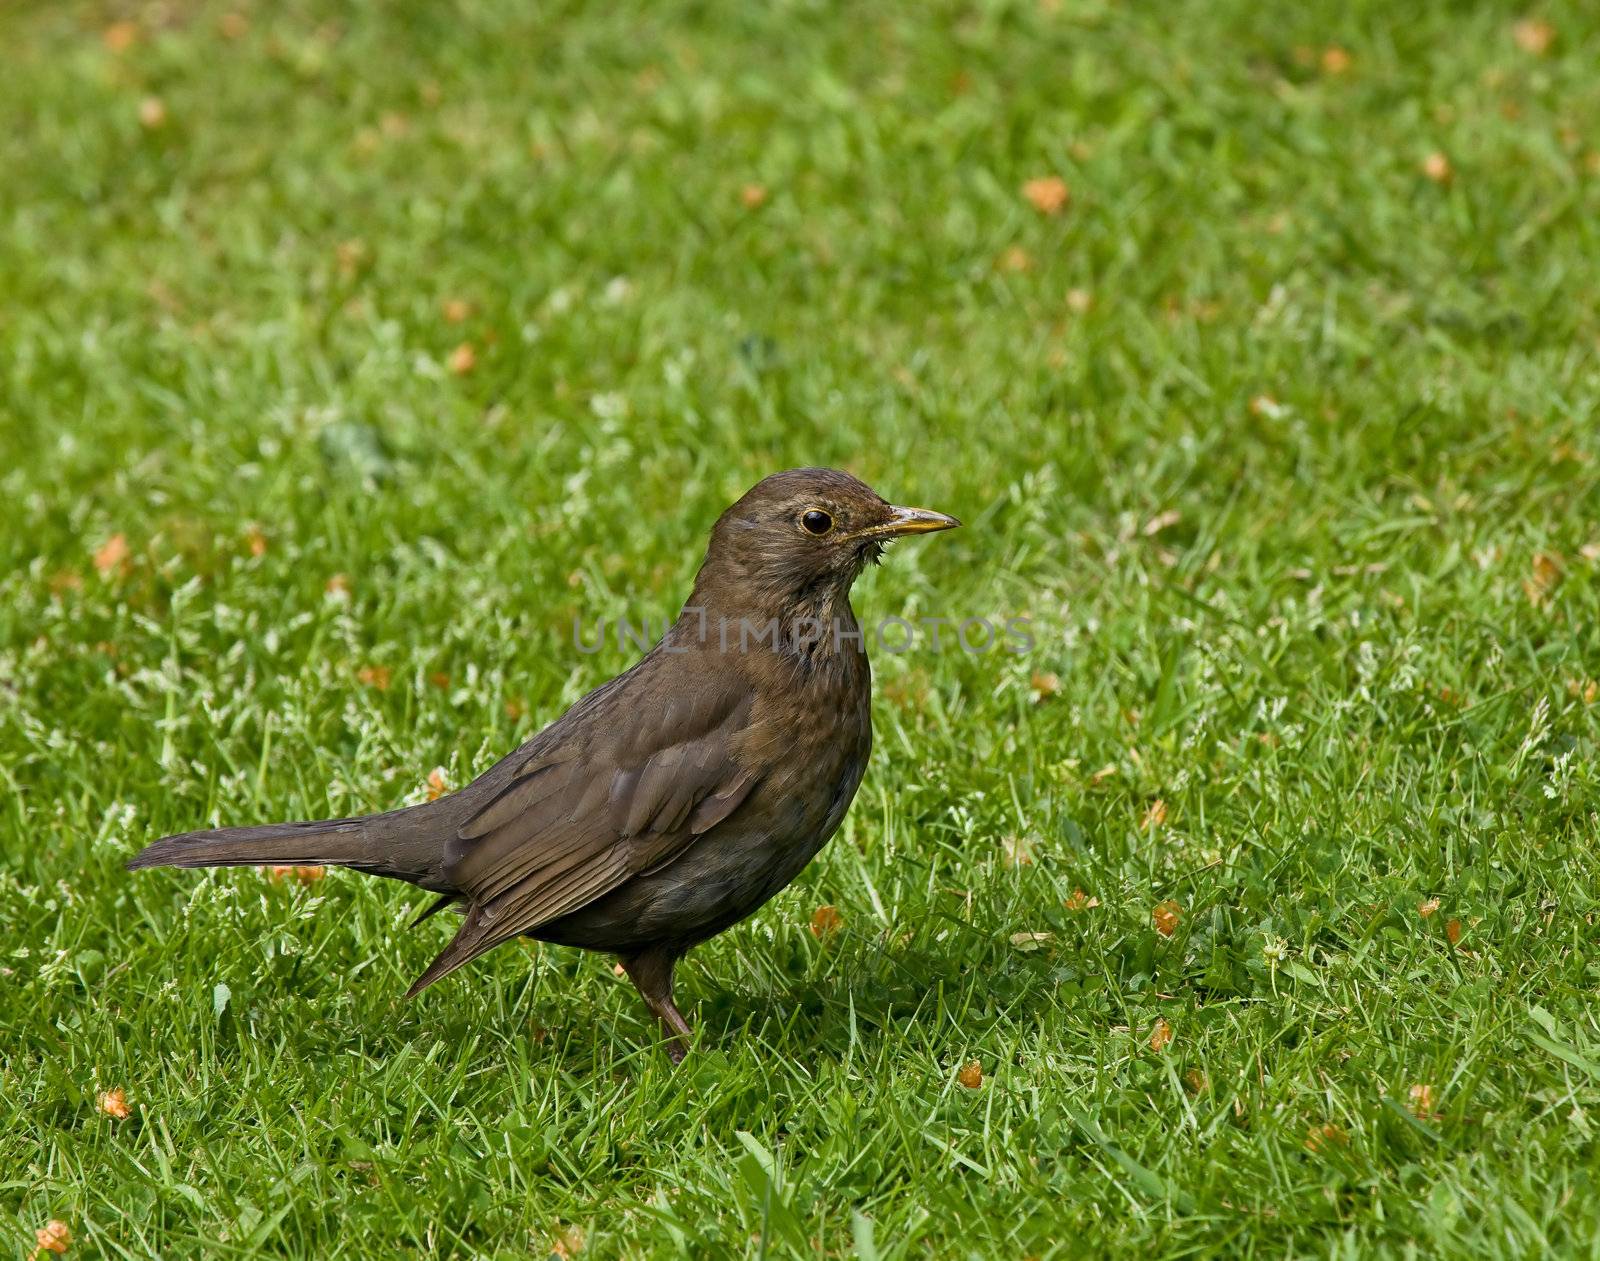 Female Common (European) Blackbird finding food for young